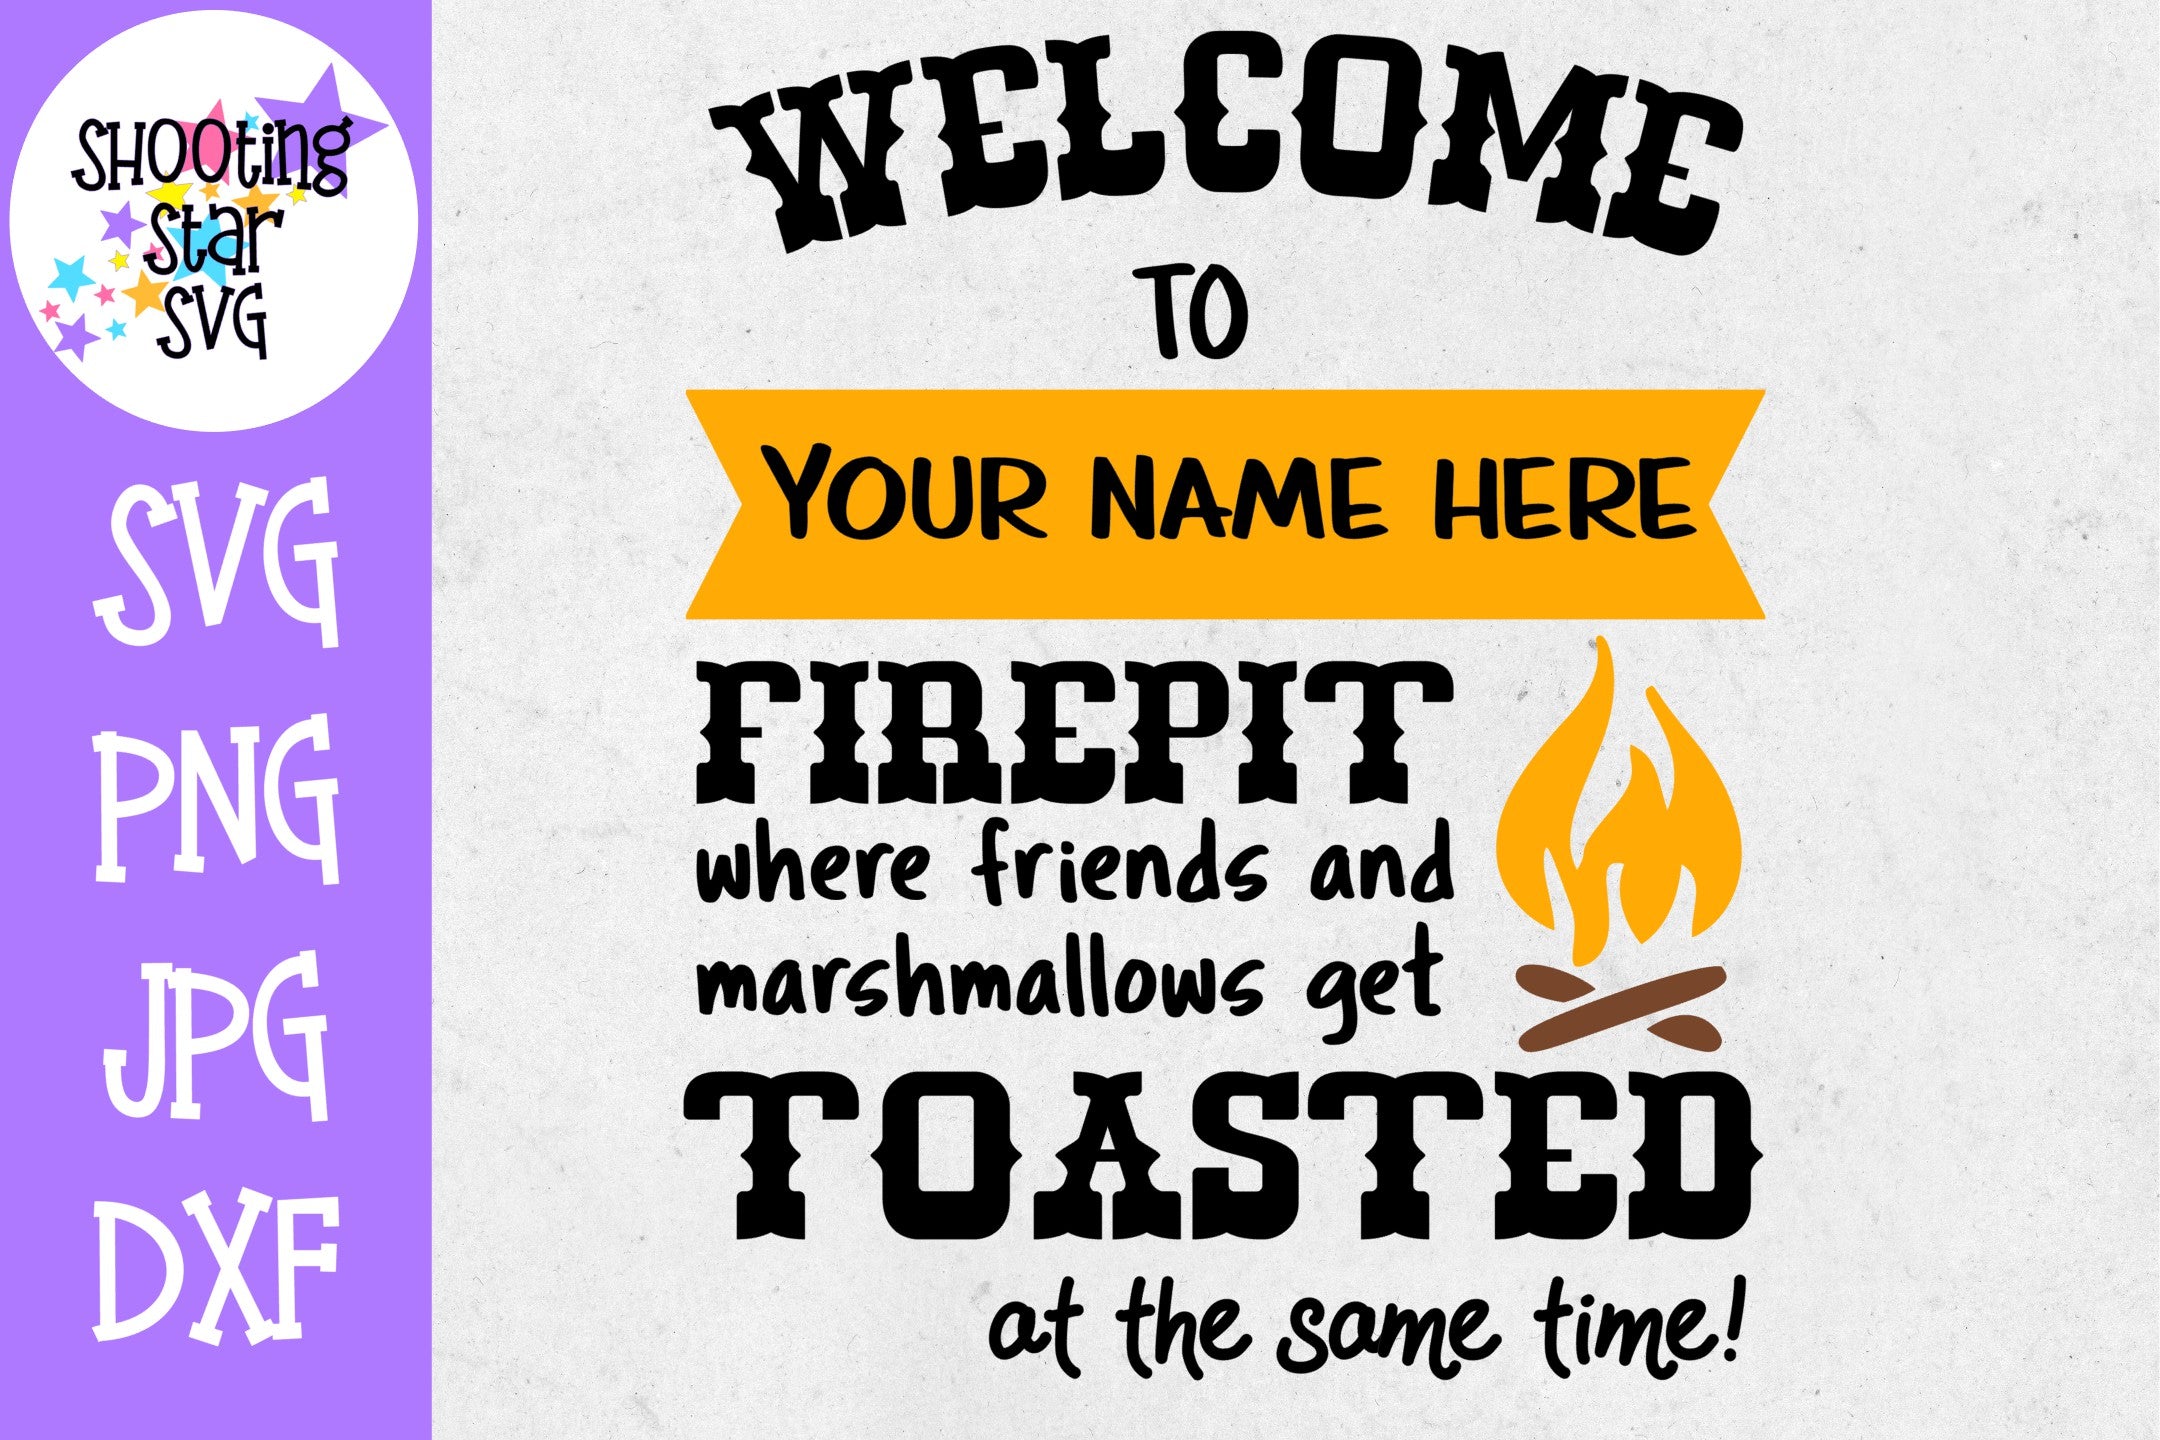 Welcome to our Firepit - Home Decor SVG